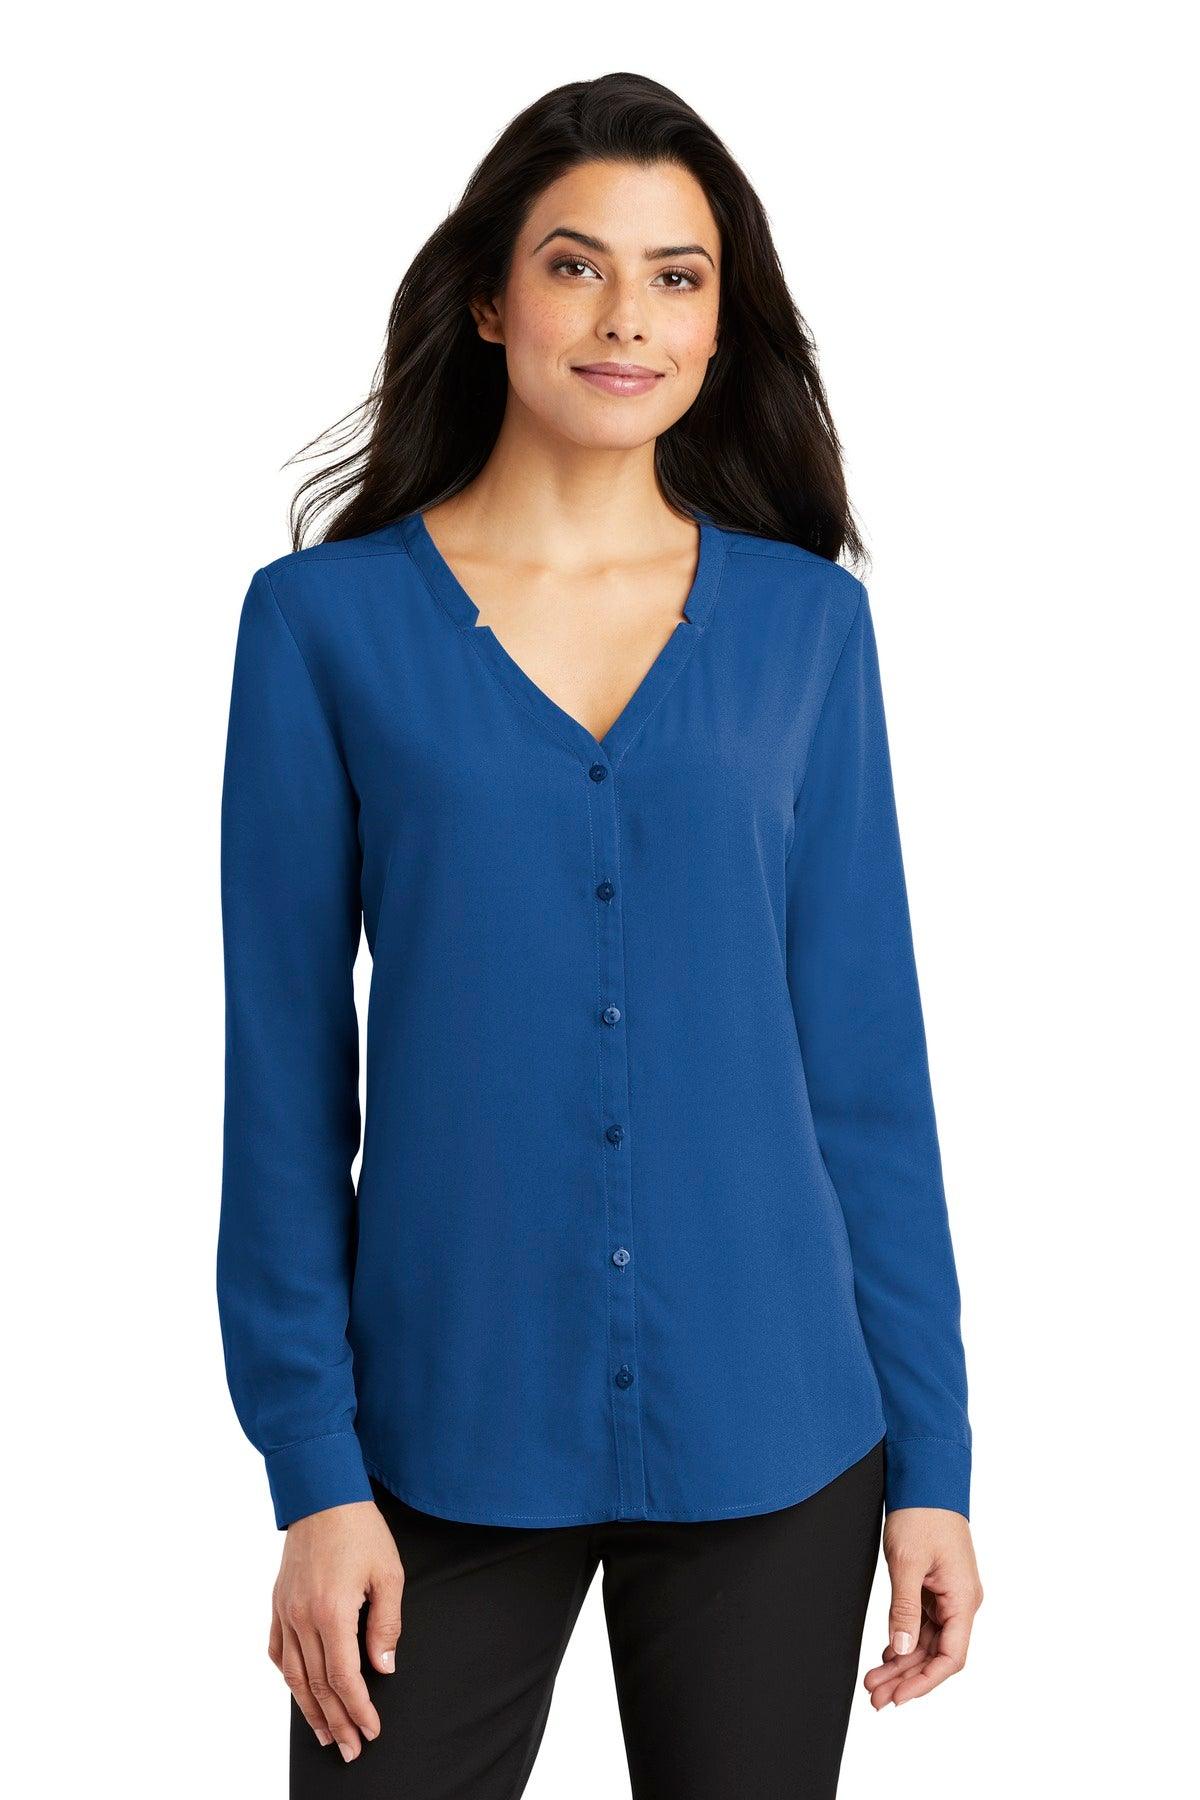 Port Authority Ladies Long Sleeve Button-Front Blouse. LW700 - Dresses Max